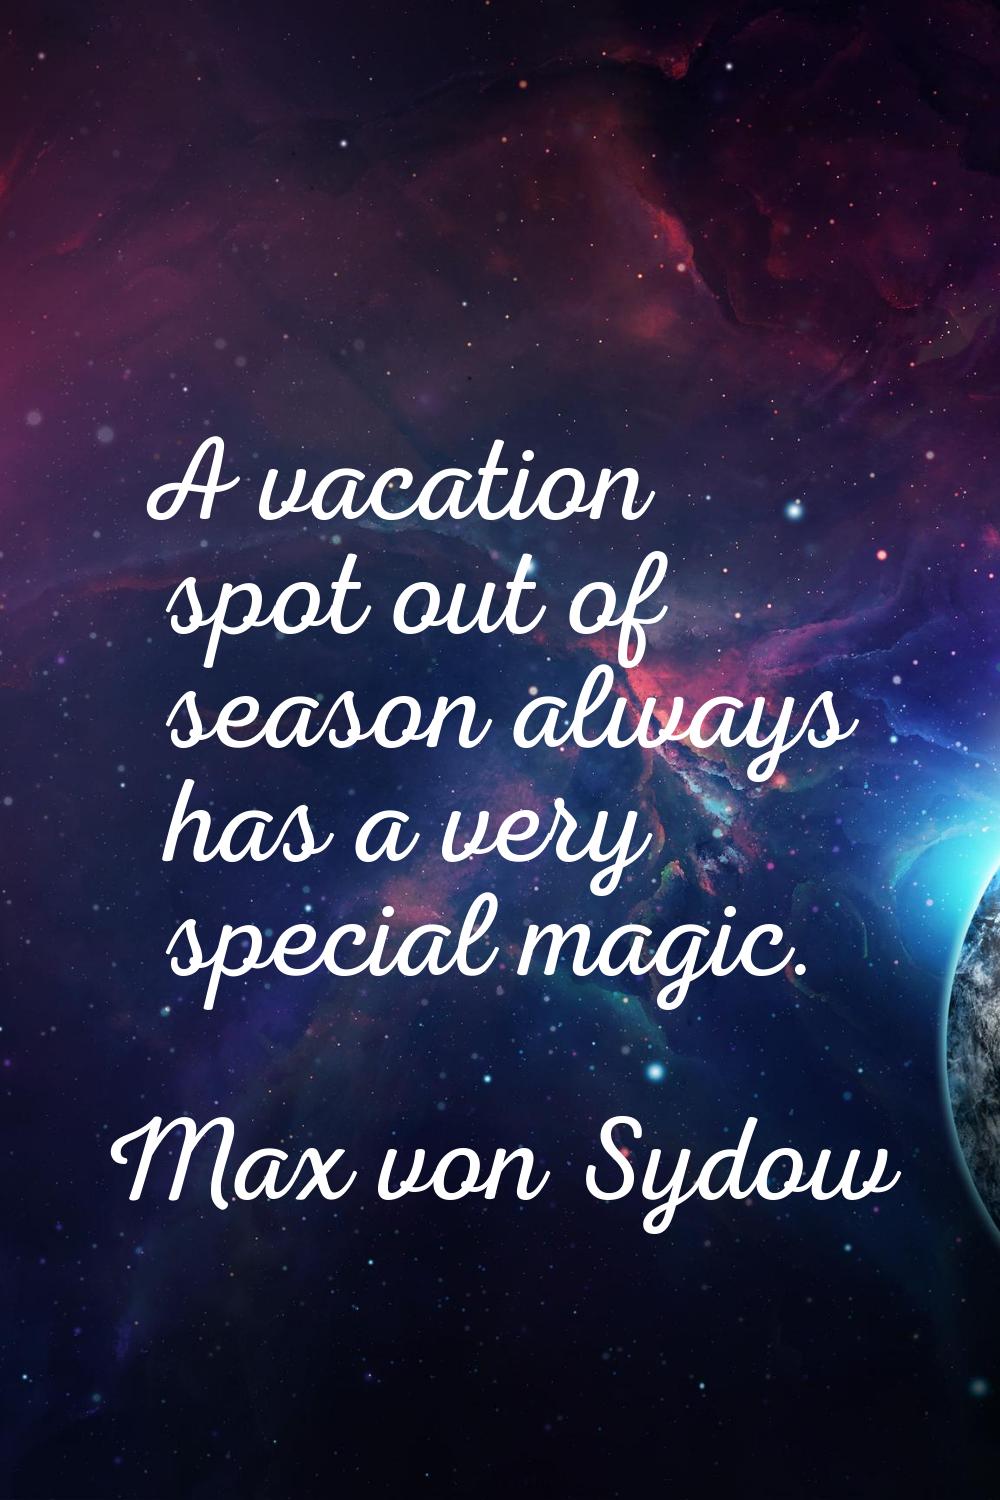 A vacation spot out of season always has a very special magic.